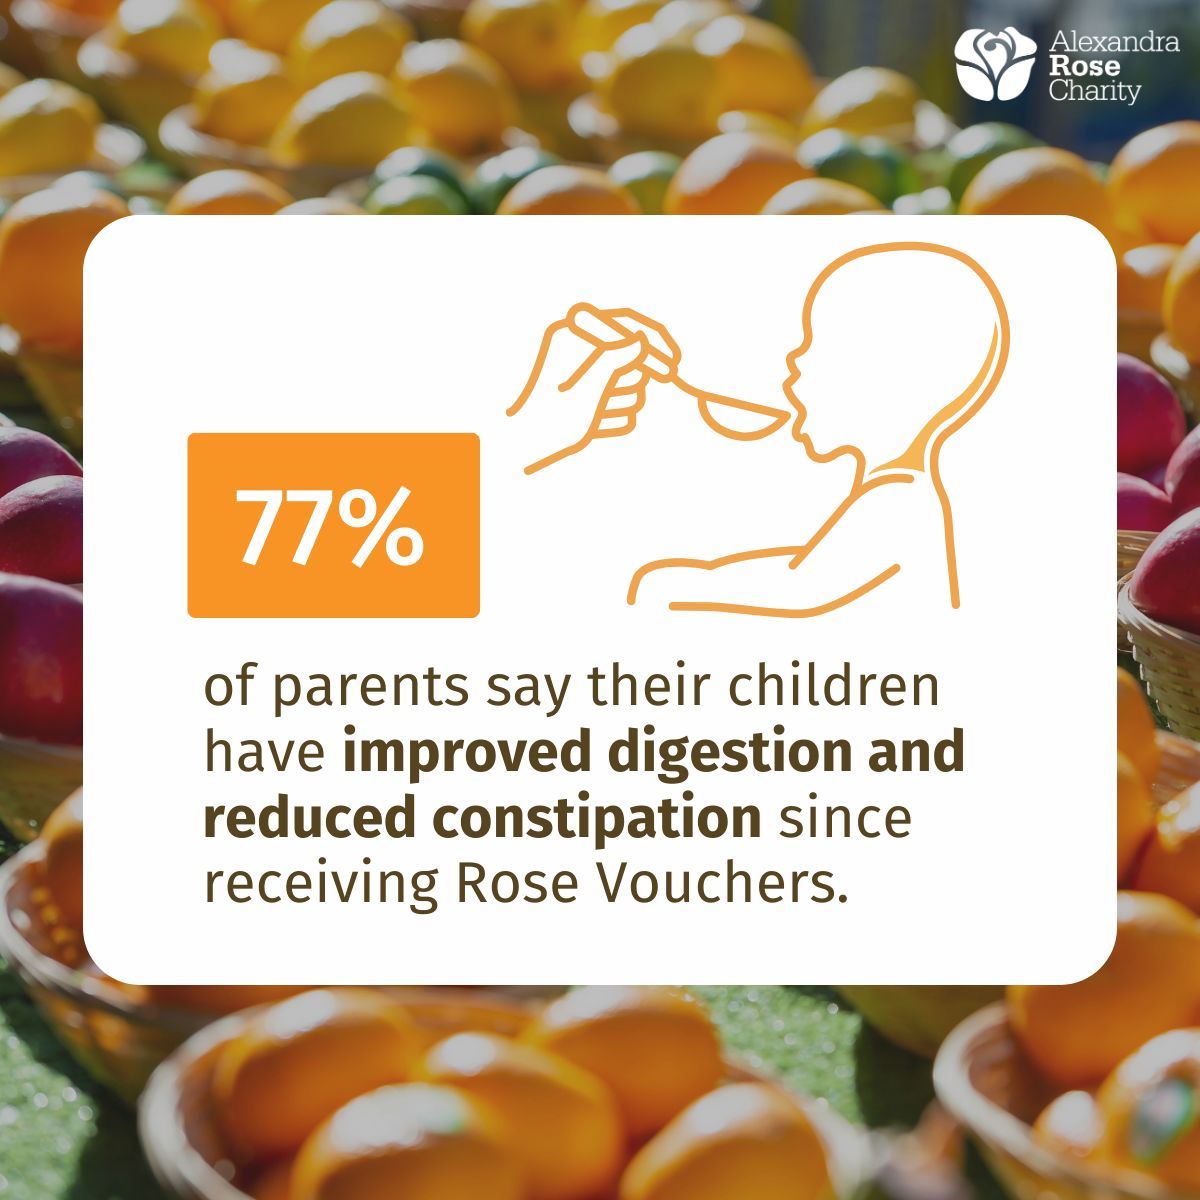 'My youngest gets constipation, and being able to regularly offer them oranges has really helped a lot with this. Even if I don’t have the money, I can still get fruit & veg every week with my Rose Vouchers.' Find out more about our impact on our website: buff.ly/3Tu01Nf